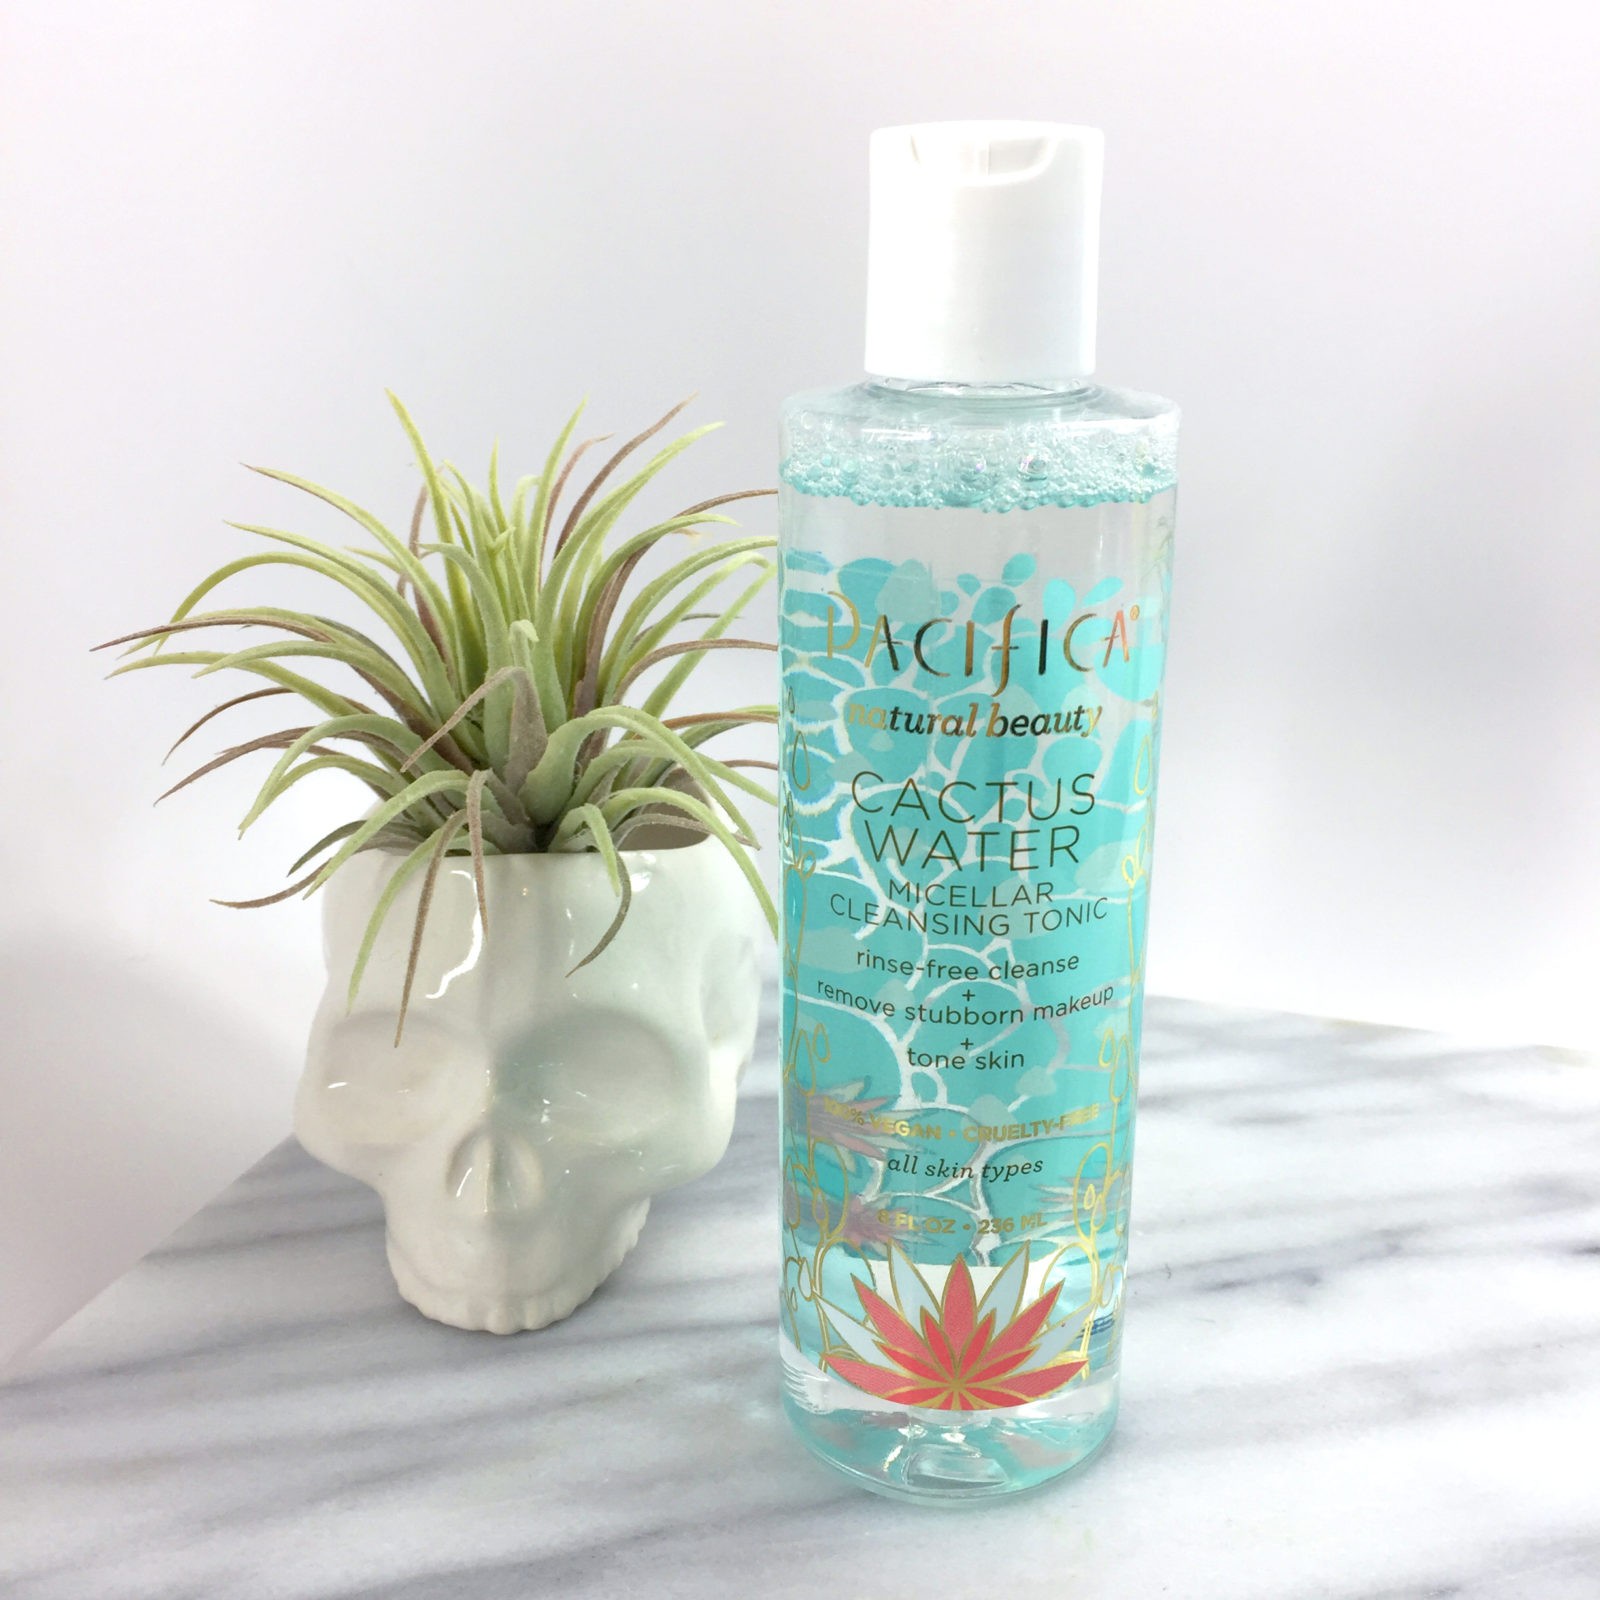 Pacifica cactus water micellar cleansing tonic